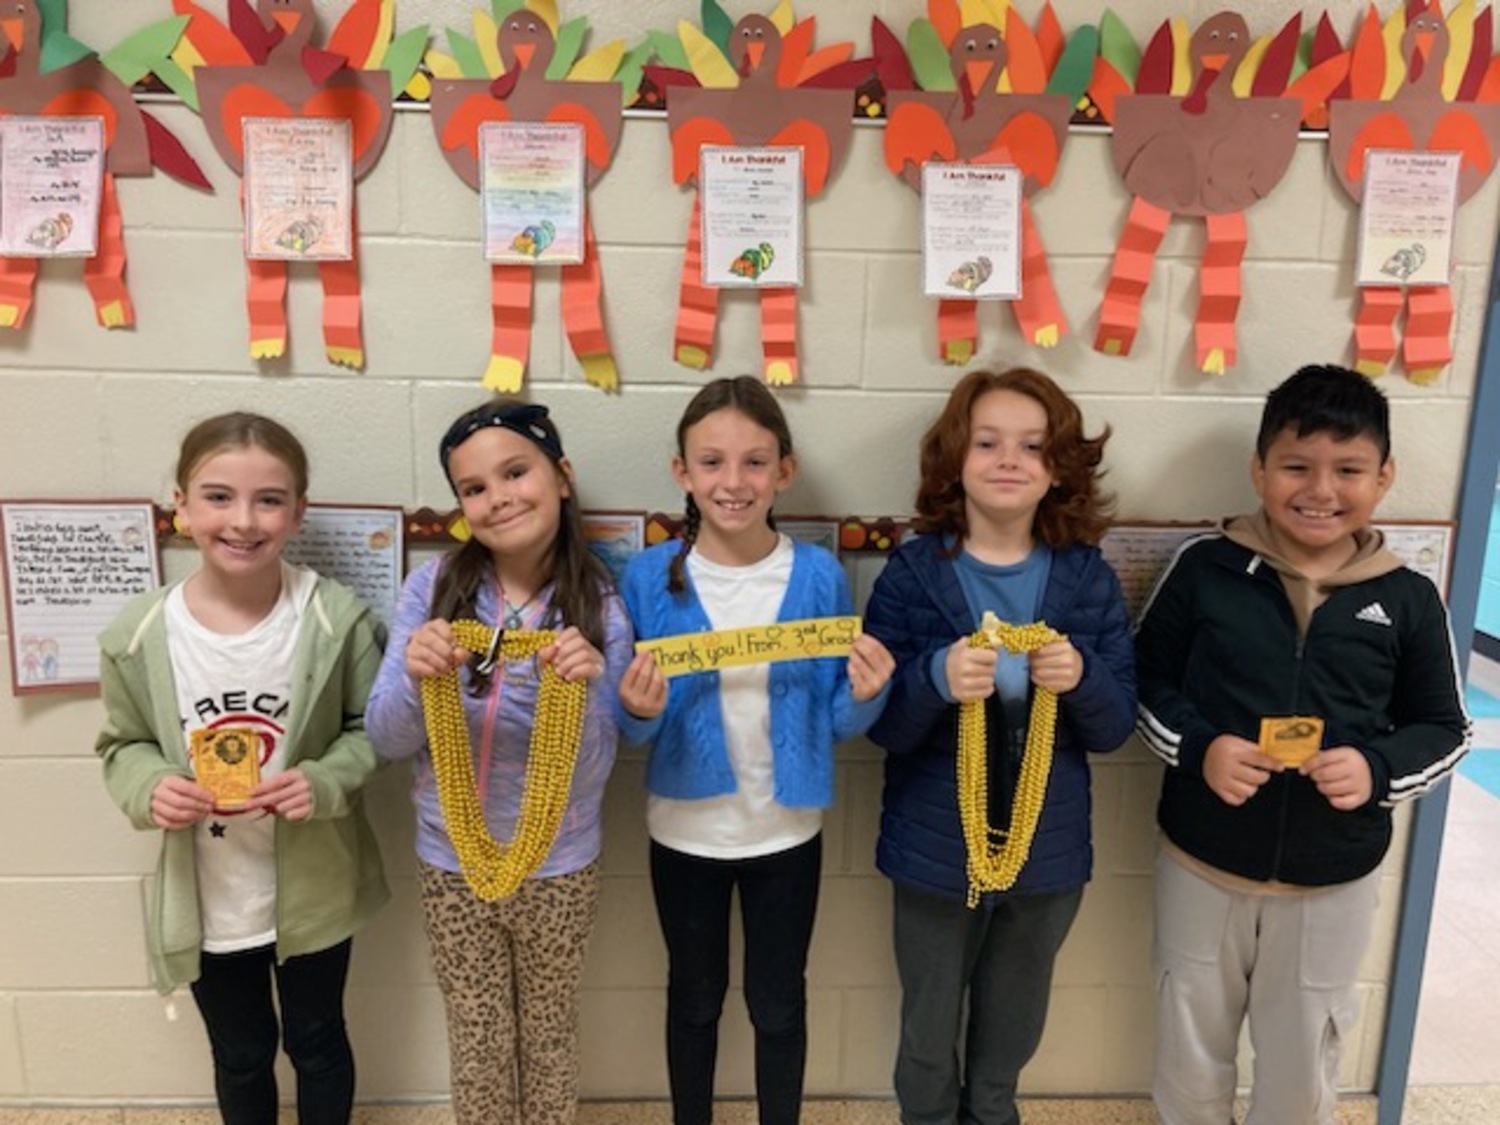 Hampton Bays Elementary School third graders in Jennifer Warren’s class recently hosted a successful fundraiser to help defray the cost of their upcoming trip to the Bronx Zoo. The students raised nearly $800 by selling Gratitude Grams, which contained a friendly message and a golden beaded necklace that they delivered to classrooms throughout their school. COURTESY  HAMPTON BAYS SCHOOL DISTRICT